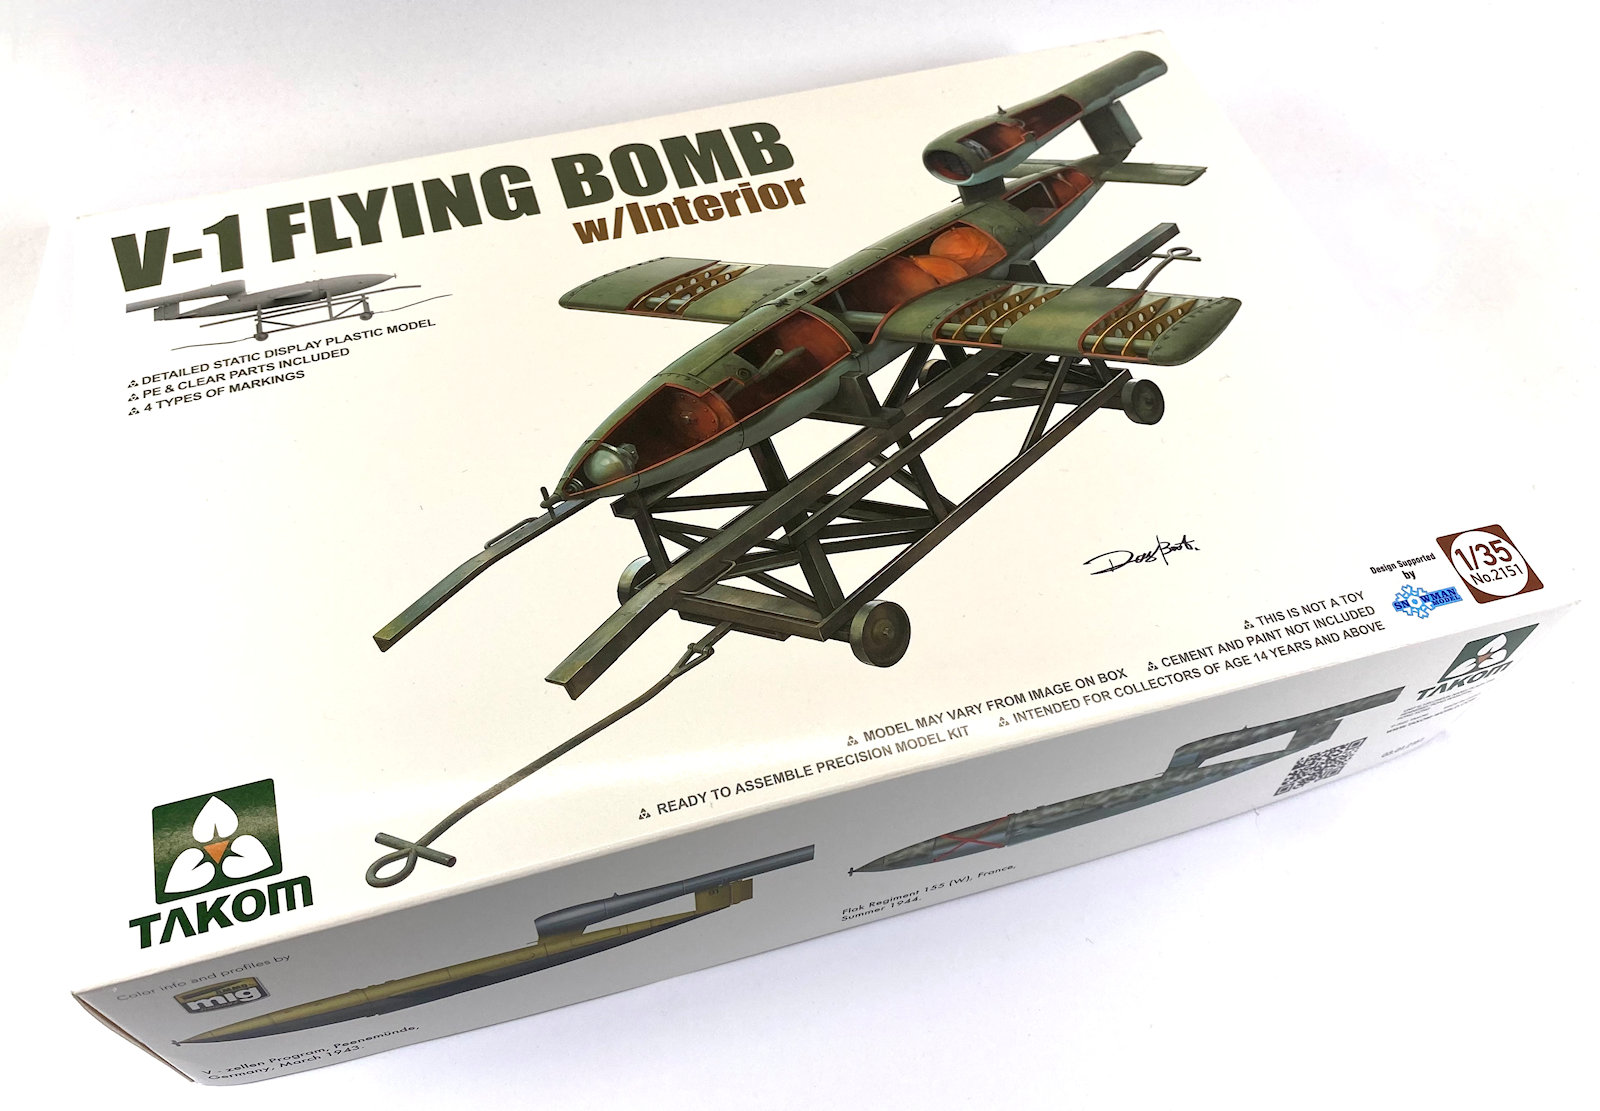 The Modelling News: In-boxed: 1/35th scale V-1 Flying Bomb w/ Interior from  Takom